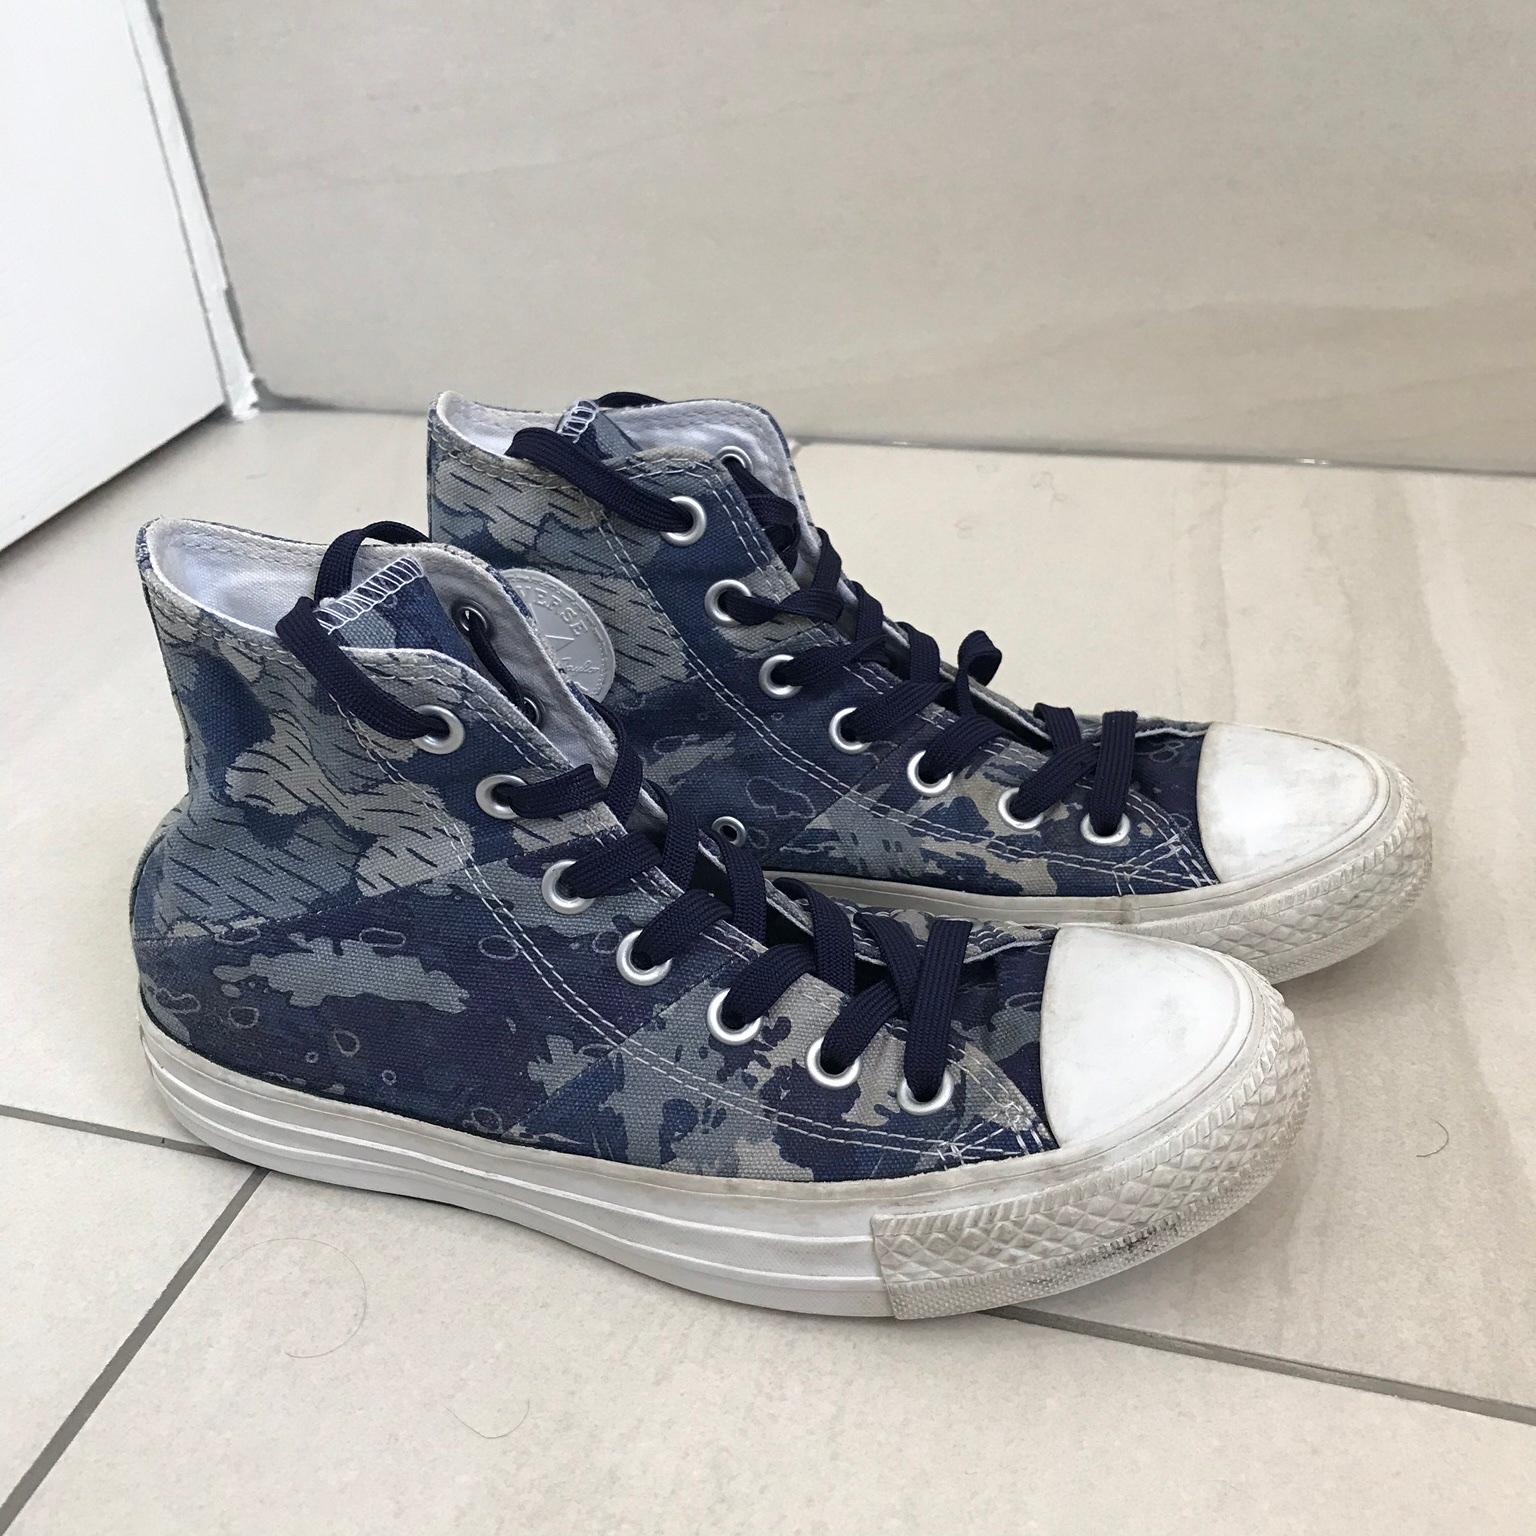 converse all star size 4